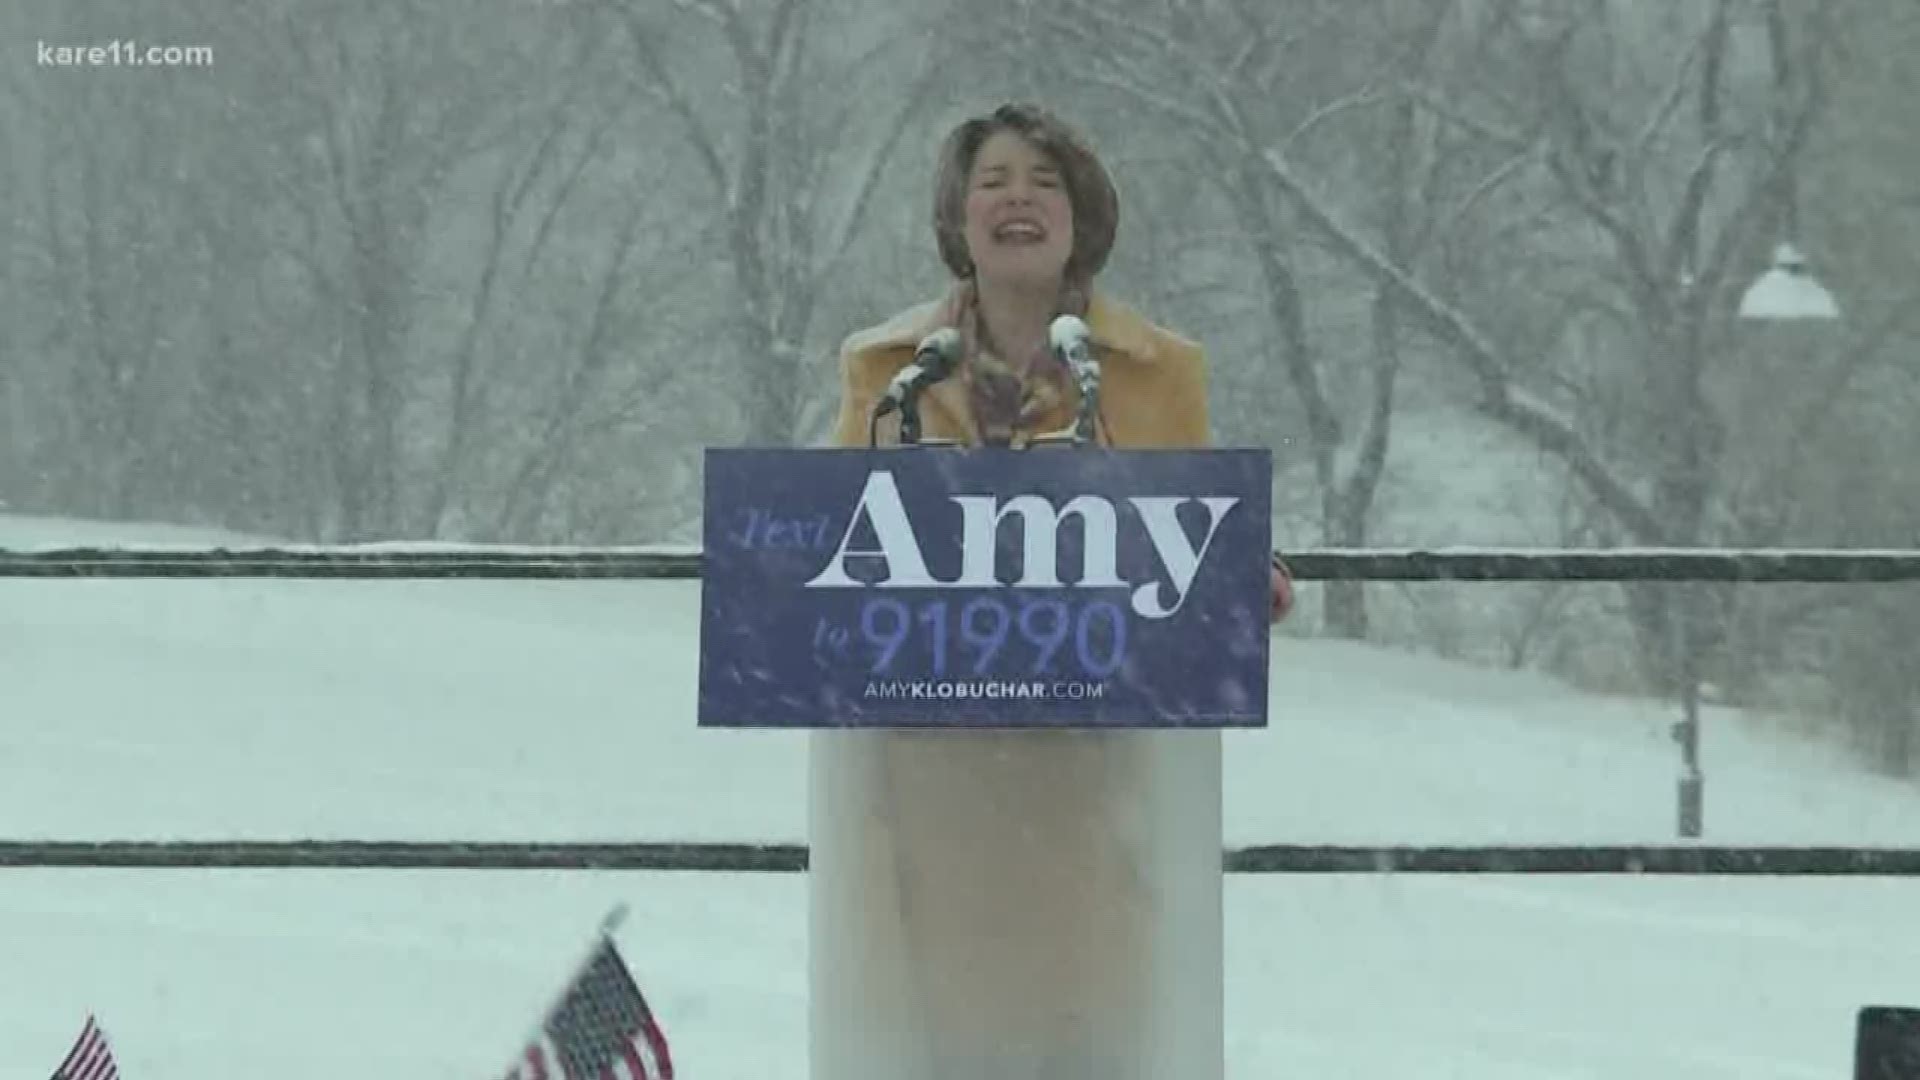 It's long been speculated Klobuchar was going to run for the highest office in the nation.
And now it's official.